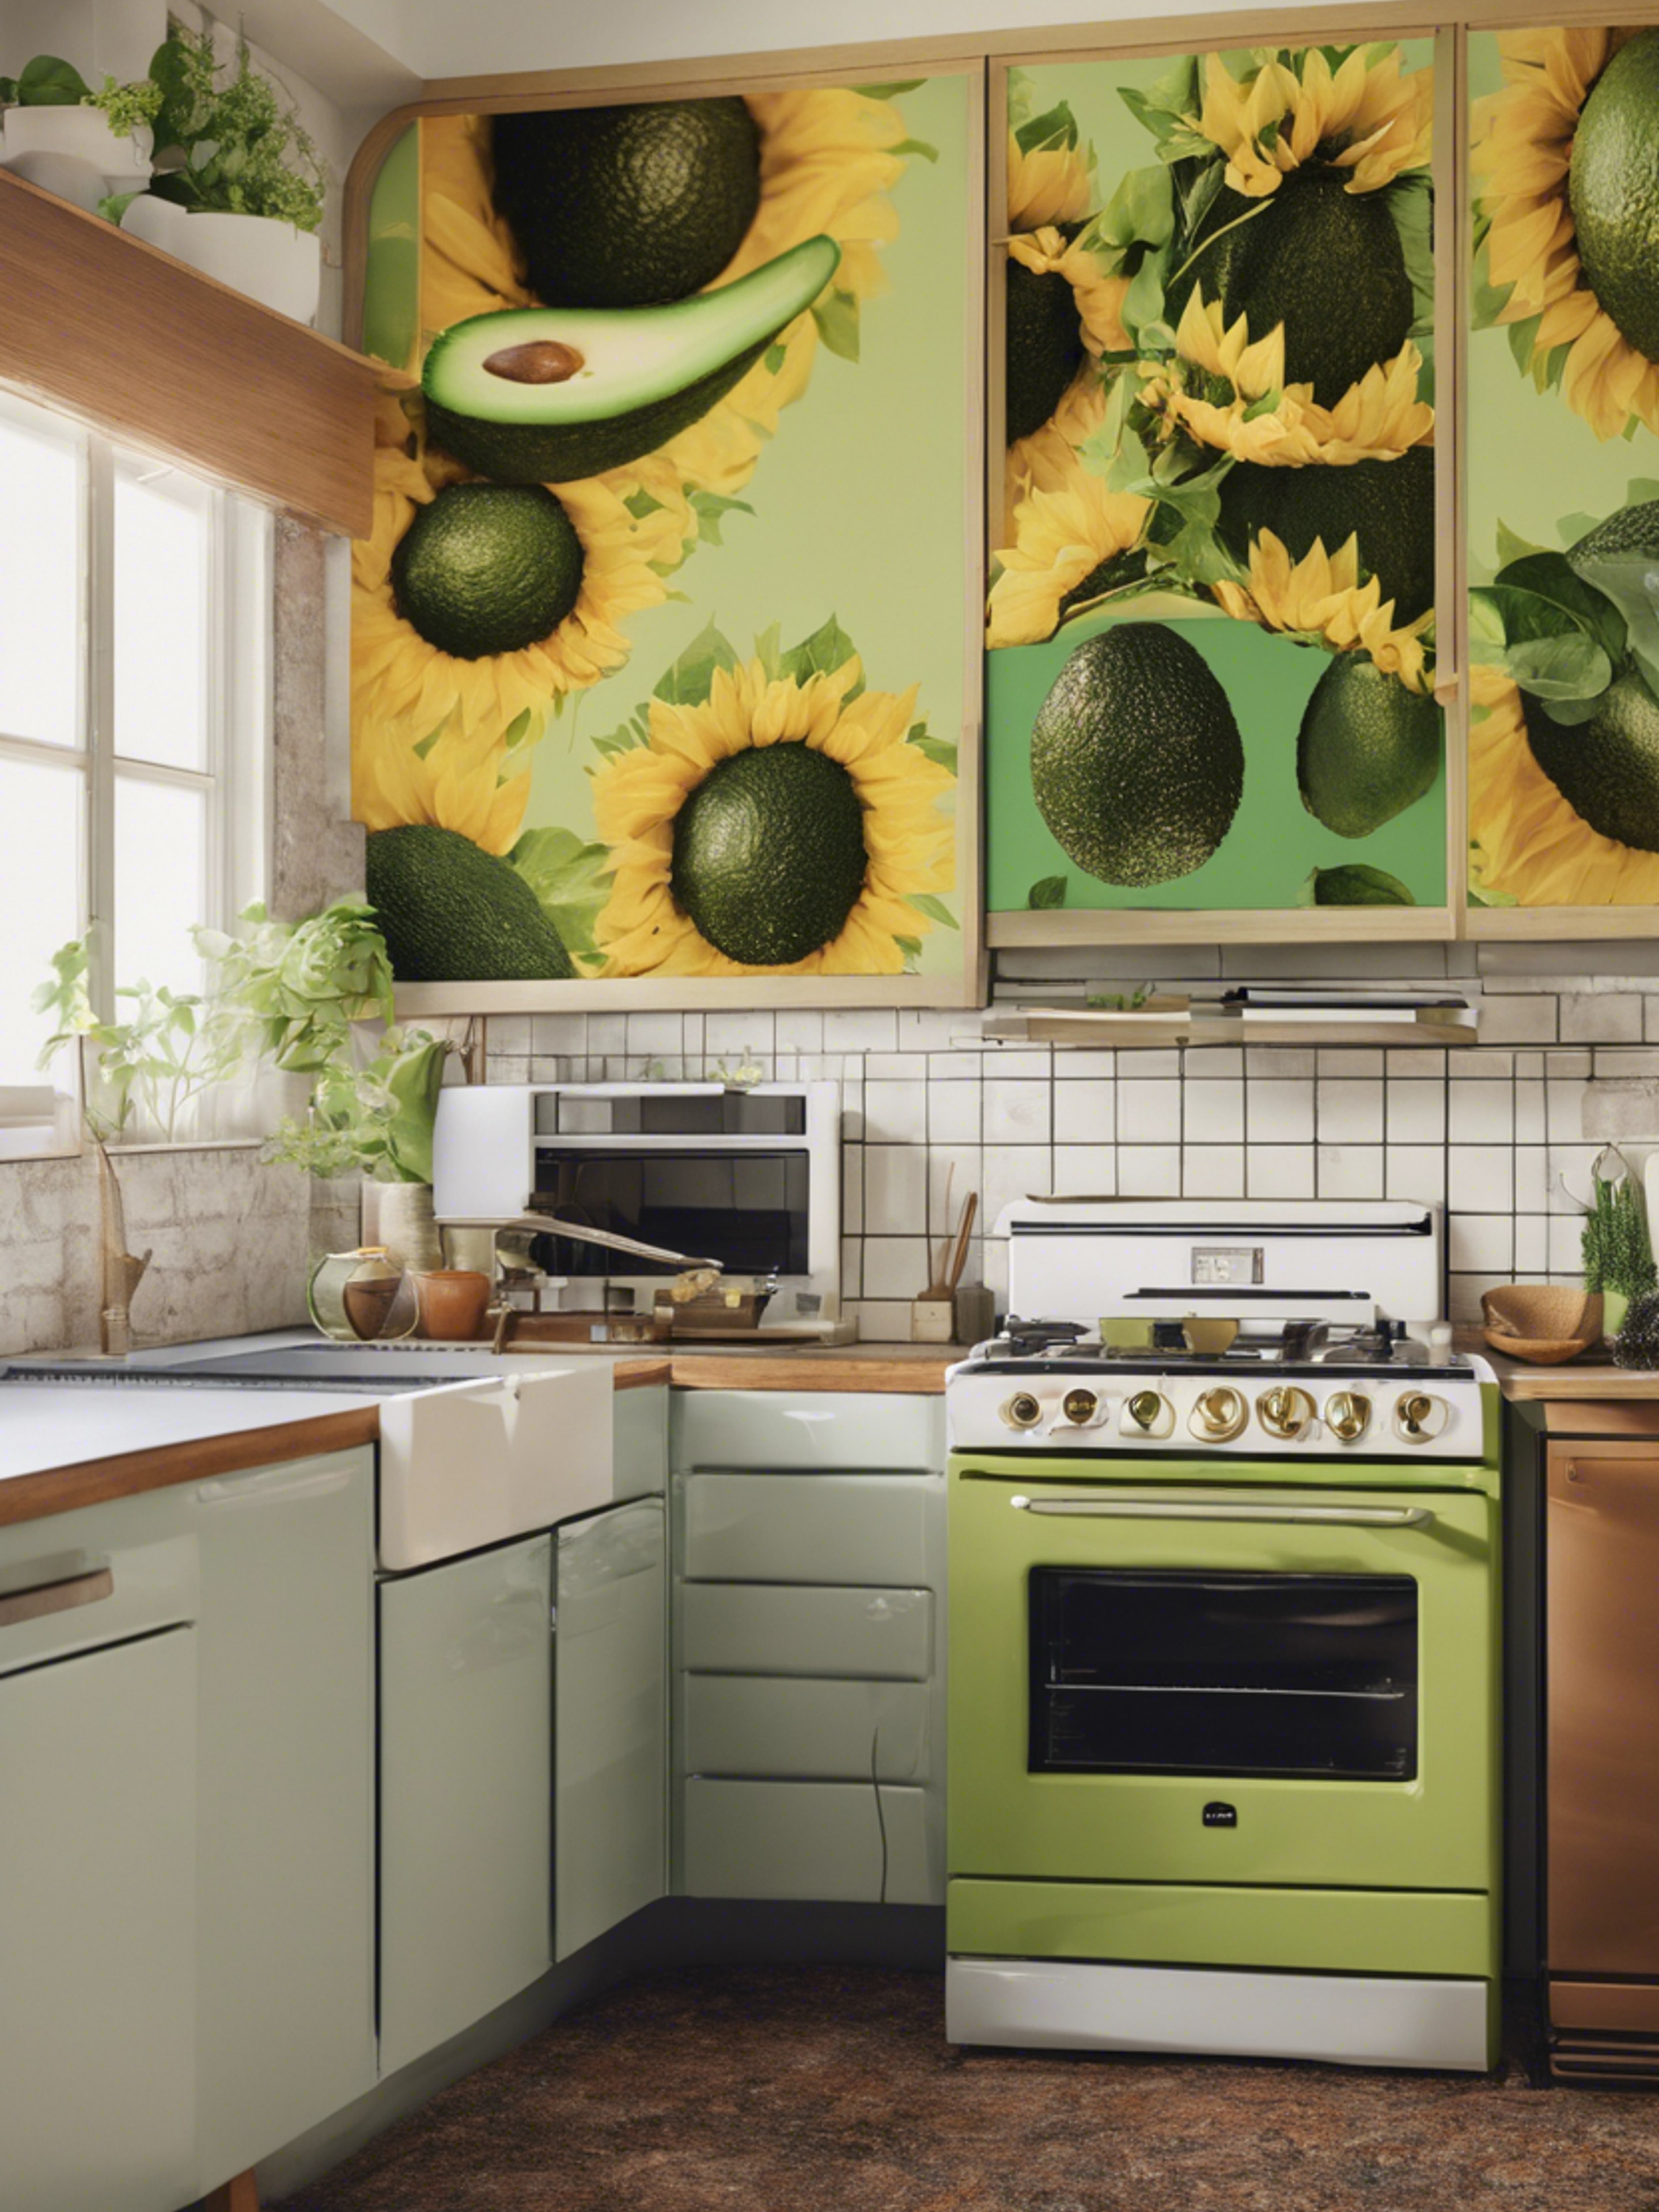 A 70s kitchen with avocado green appliances and oversized sunflower prints Ფონი[58674ee3cd464da7b0a1]